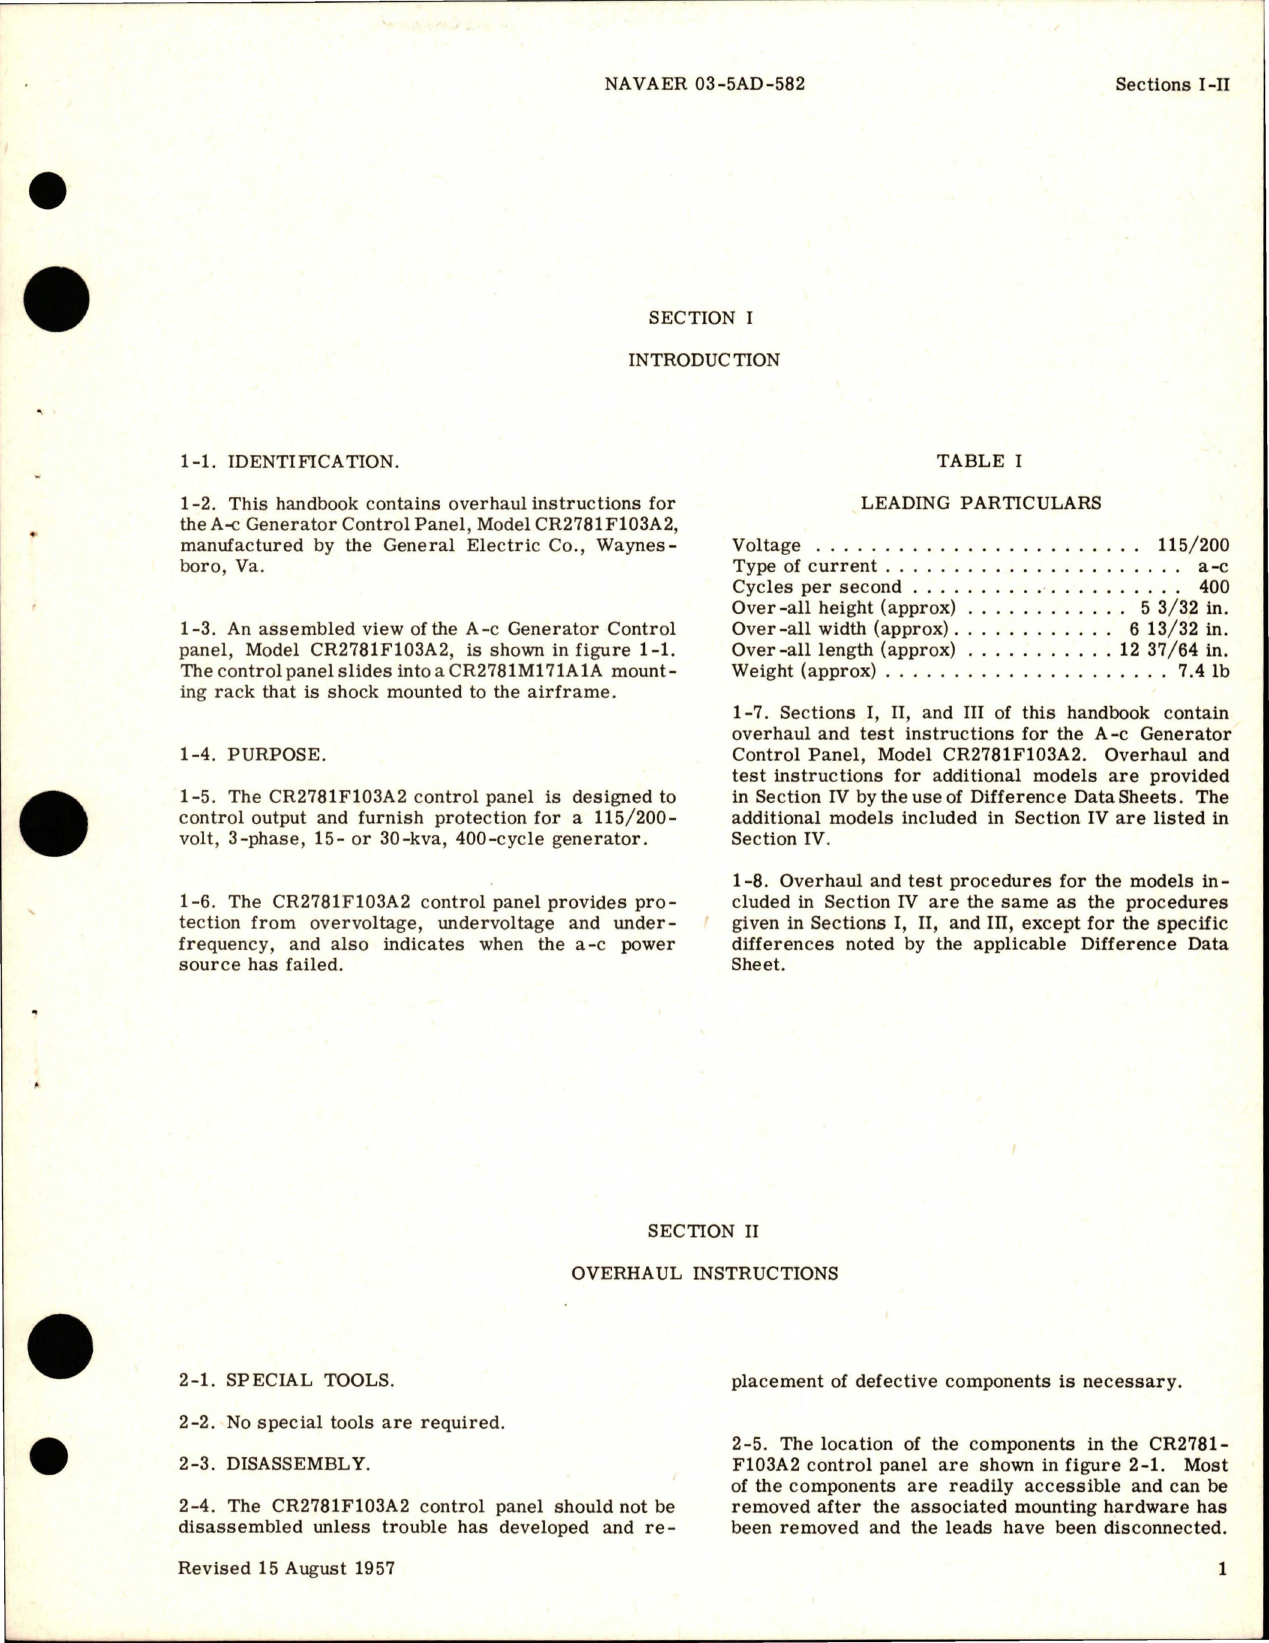 Sample page 5 from AirCorps Library document: Overhaul Instructions for AC Generator Control Panel - Model CR2781F103A2 and CR2781F103B1